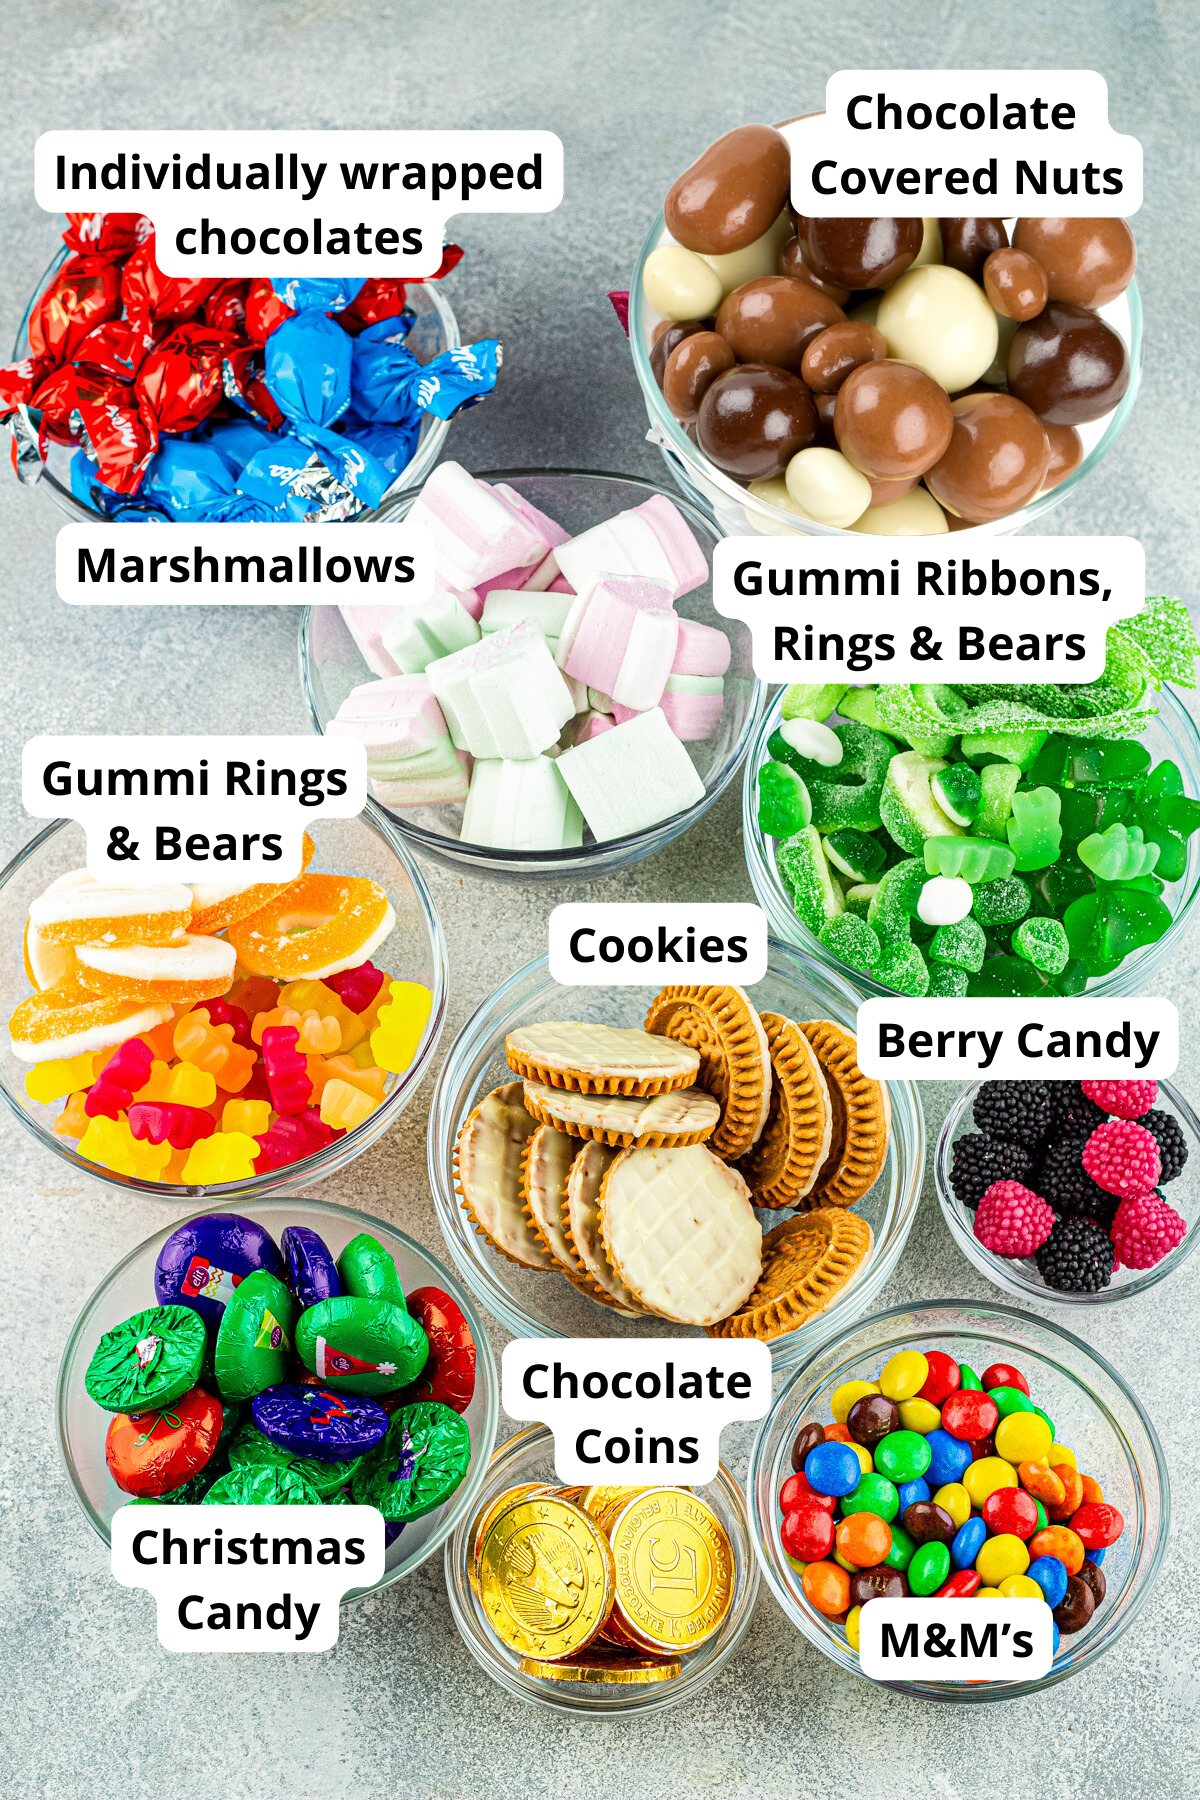 types of candy and chocolates needed to make this Christmas candy charcuterie board